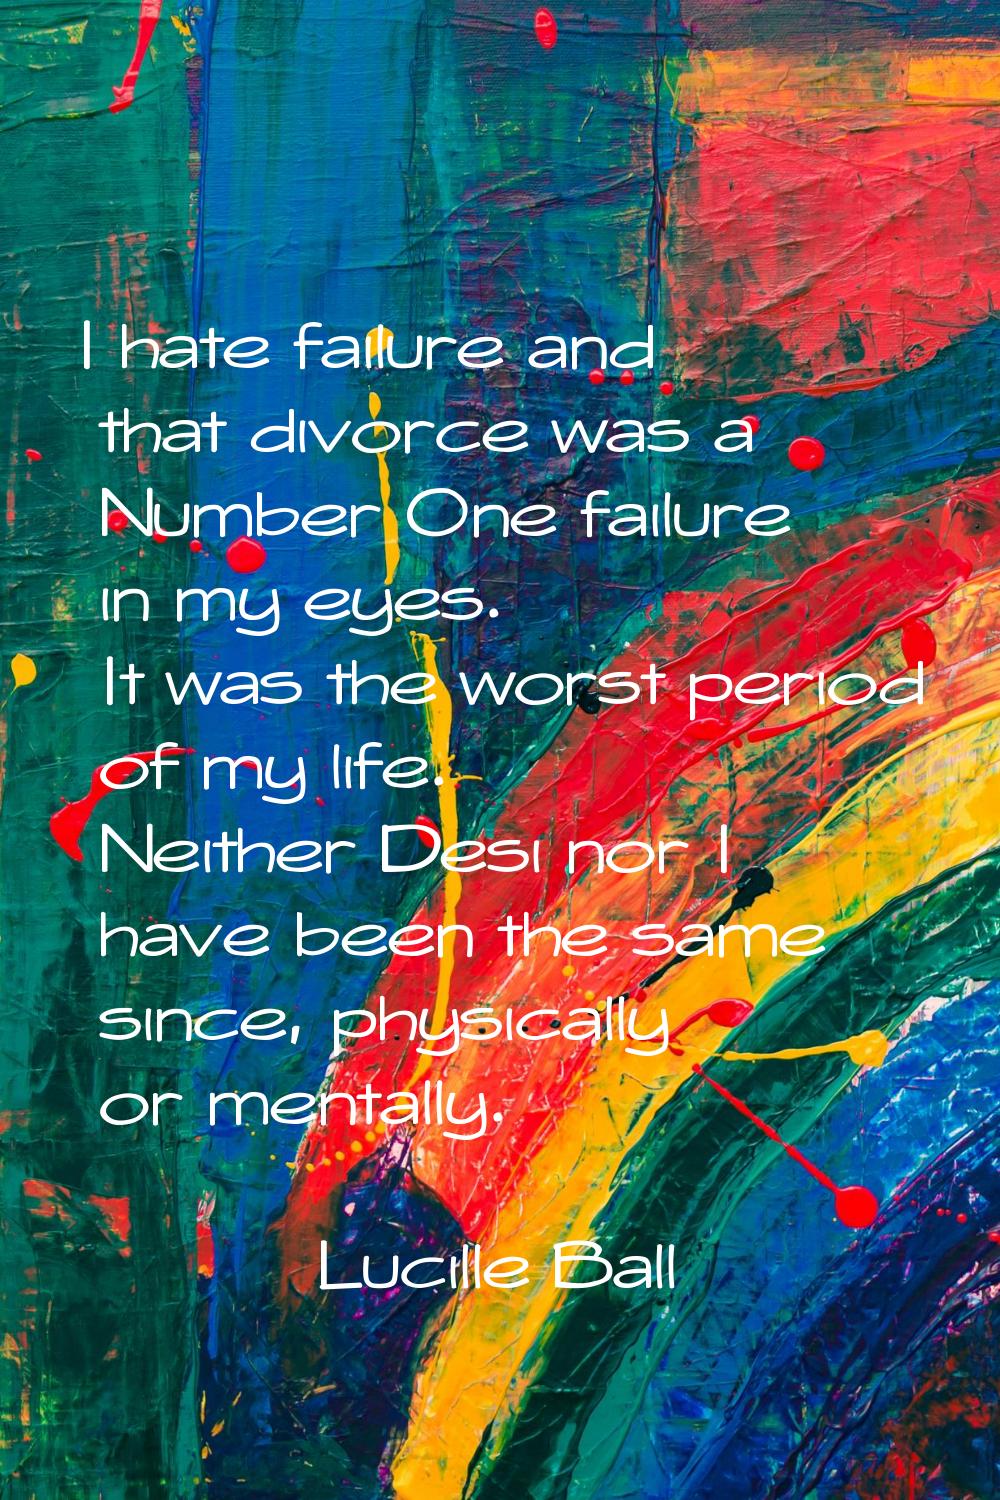 I hate failure and that divorce was a Number One failure in my eyes. It was the worst period of my 